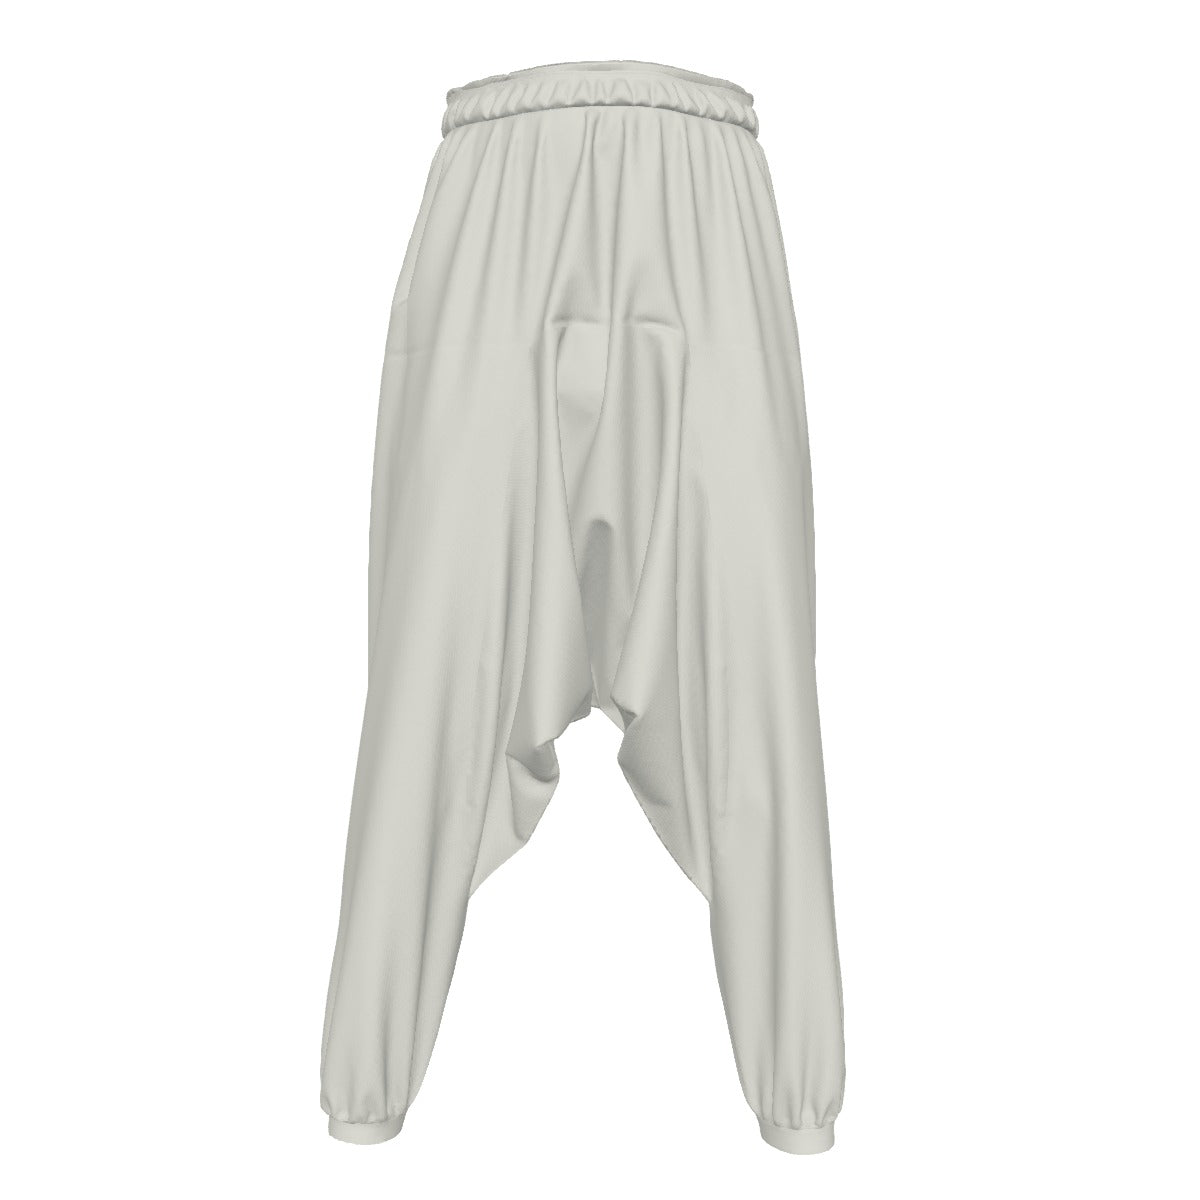 Loose Meditation and Yoga Trousers for Men